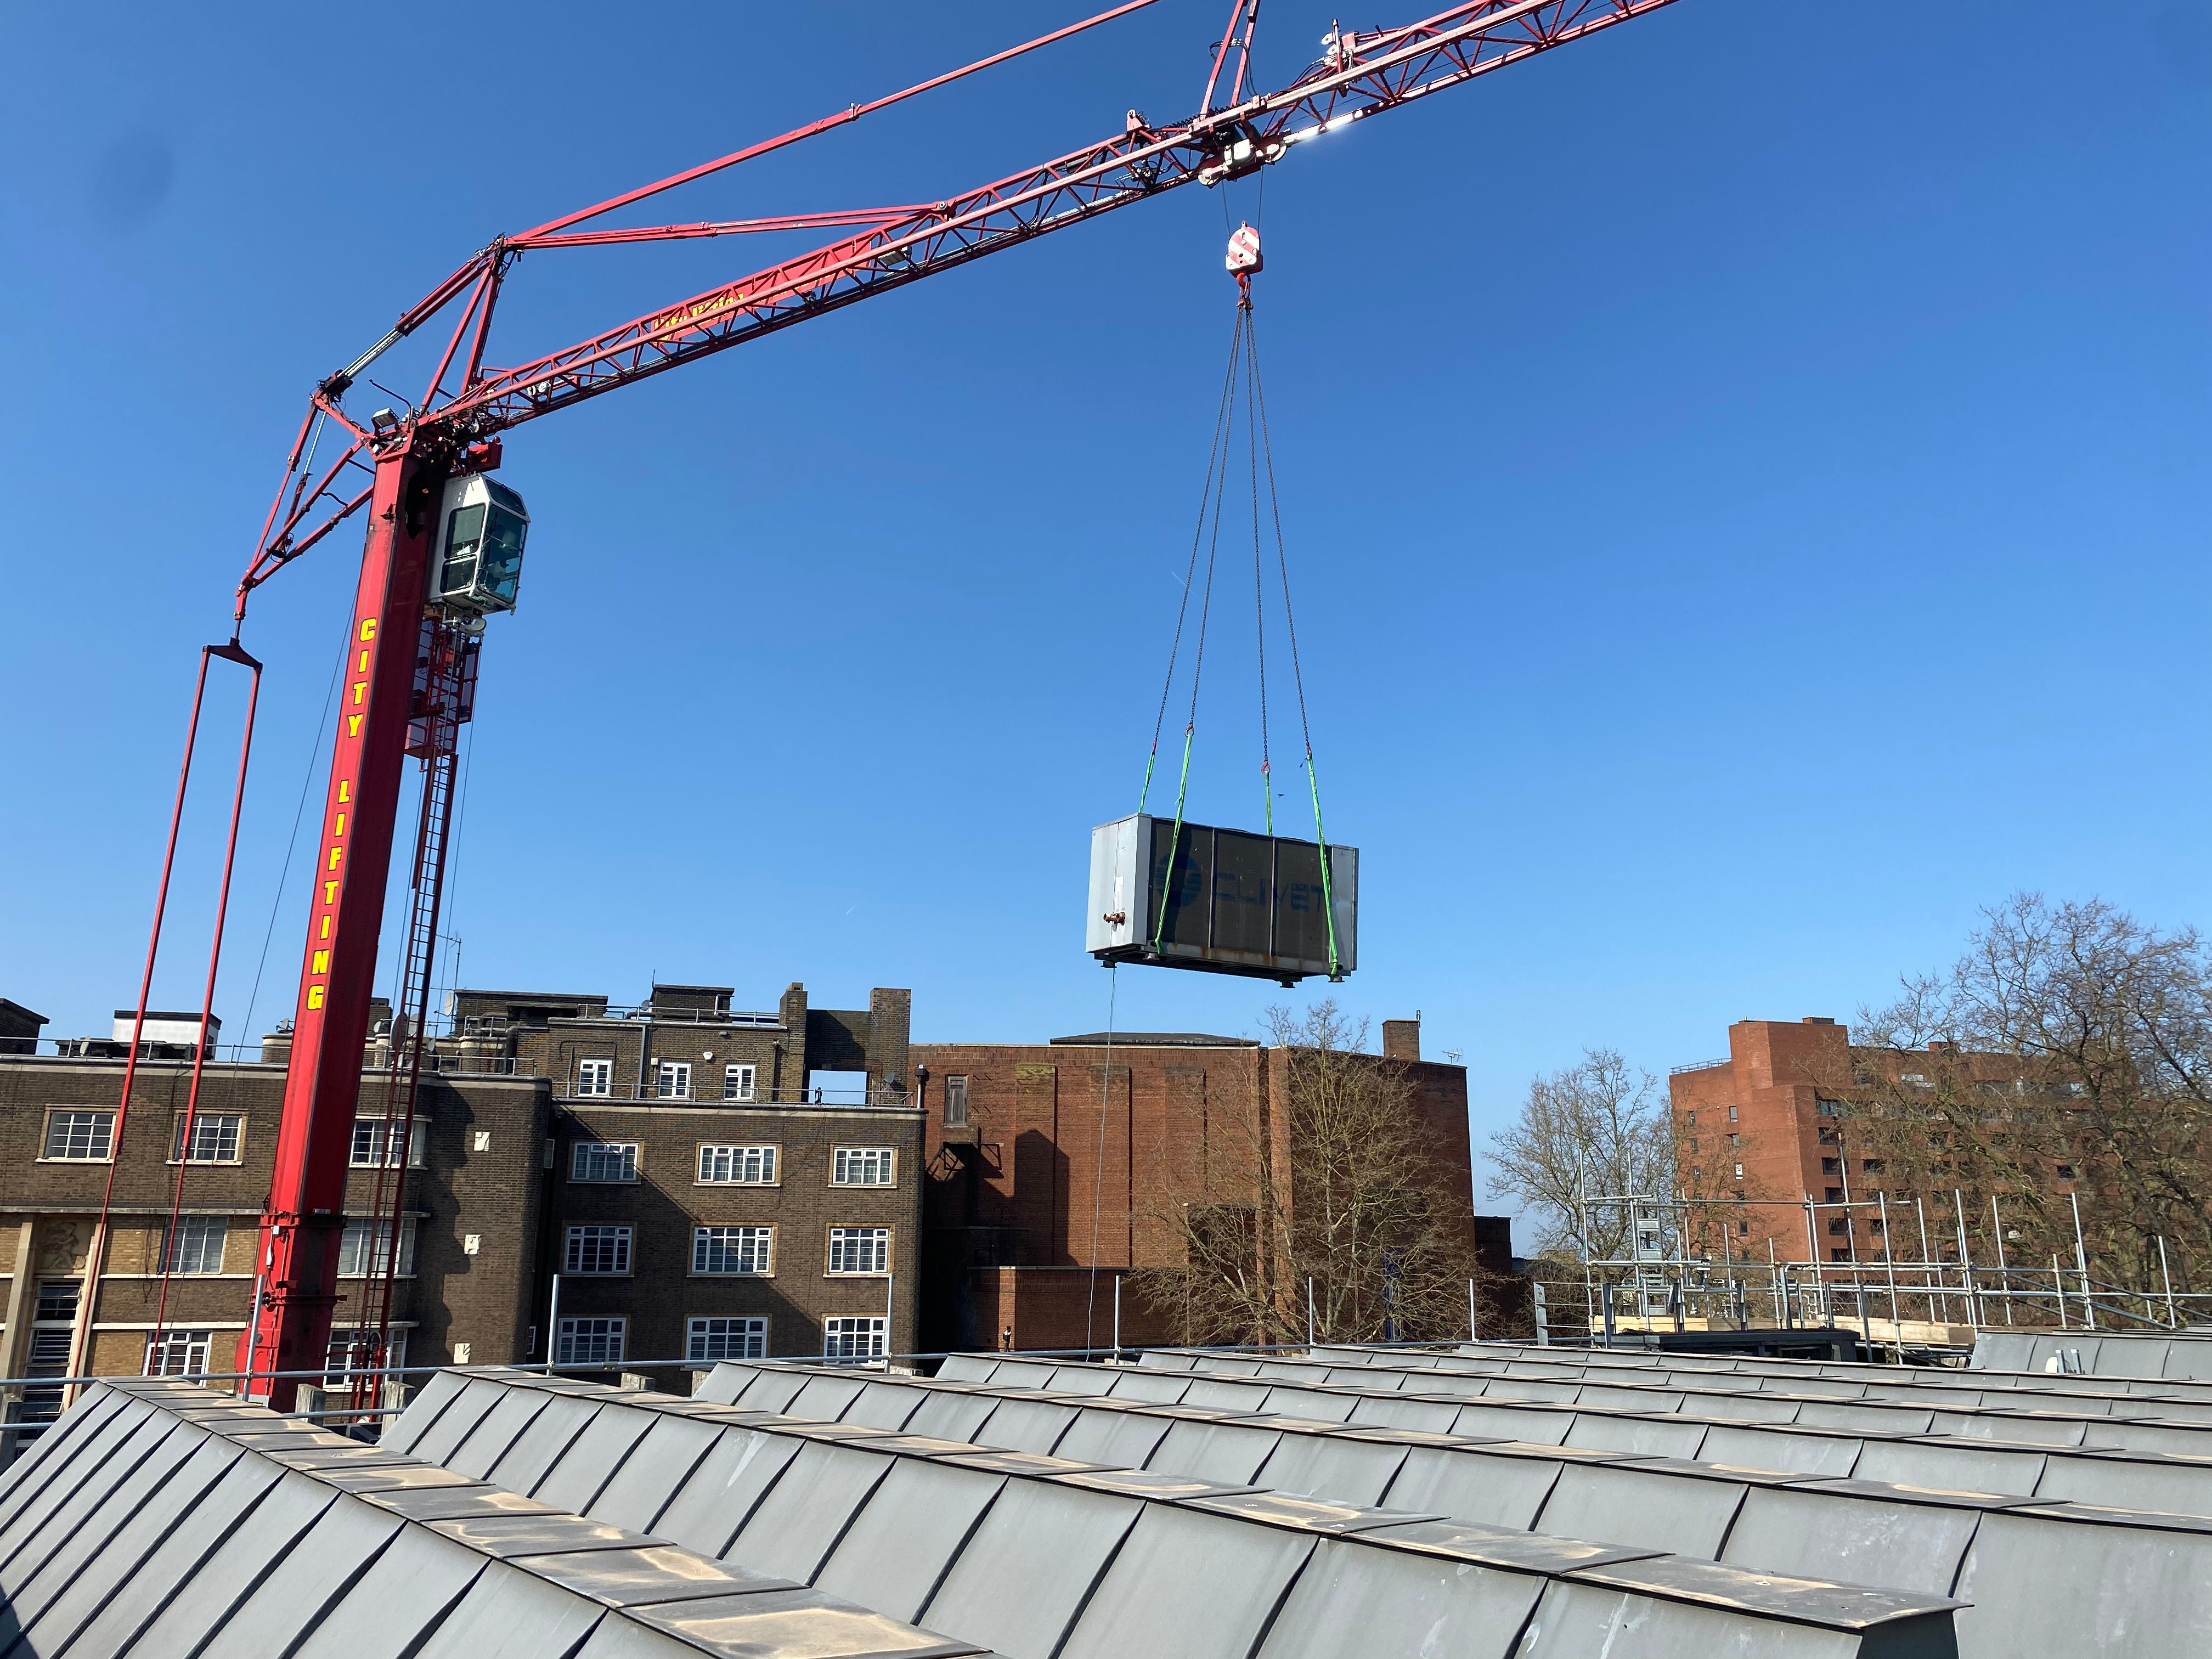 Clear Skies for Swiss Cottage Plant Removal